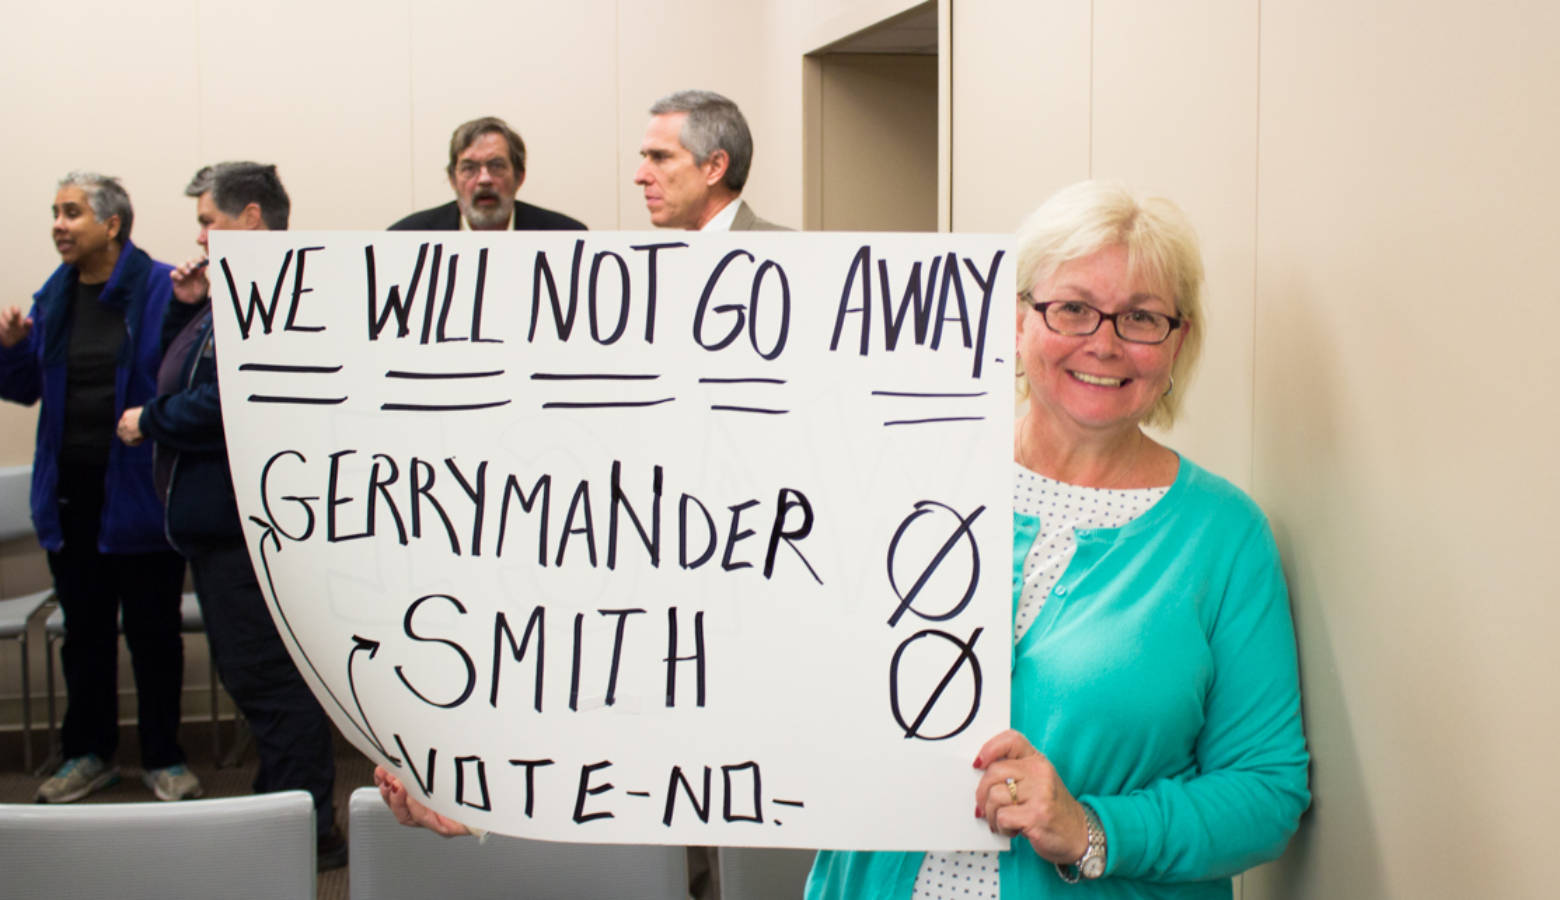 Barbara Wolanin was one of around 30 people protesting the legislature's failure to adopt redistricting reform. (Nick Janzen/IPBS)